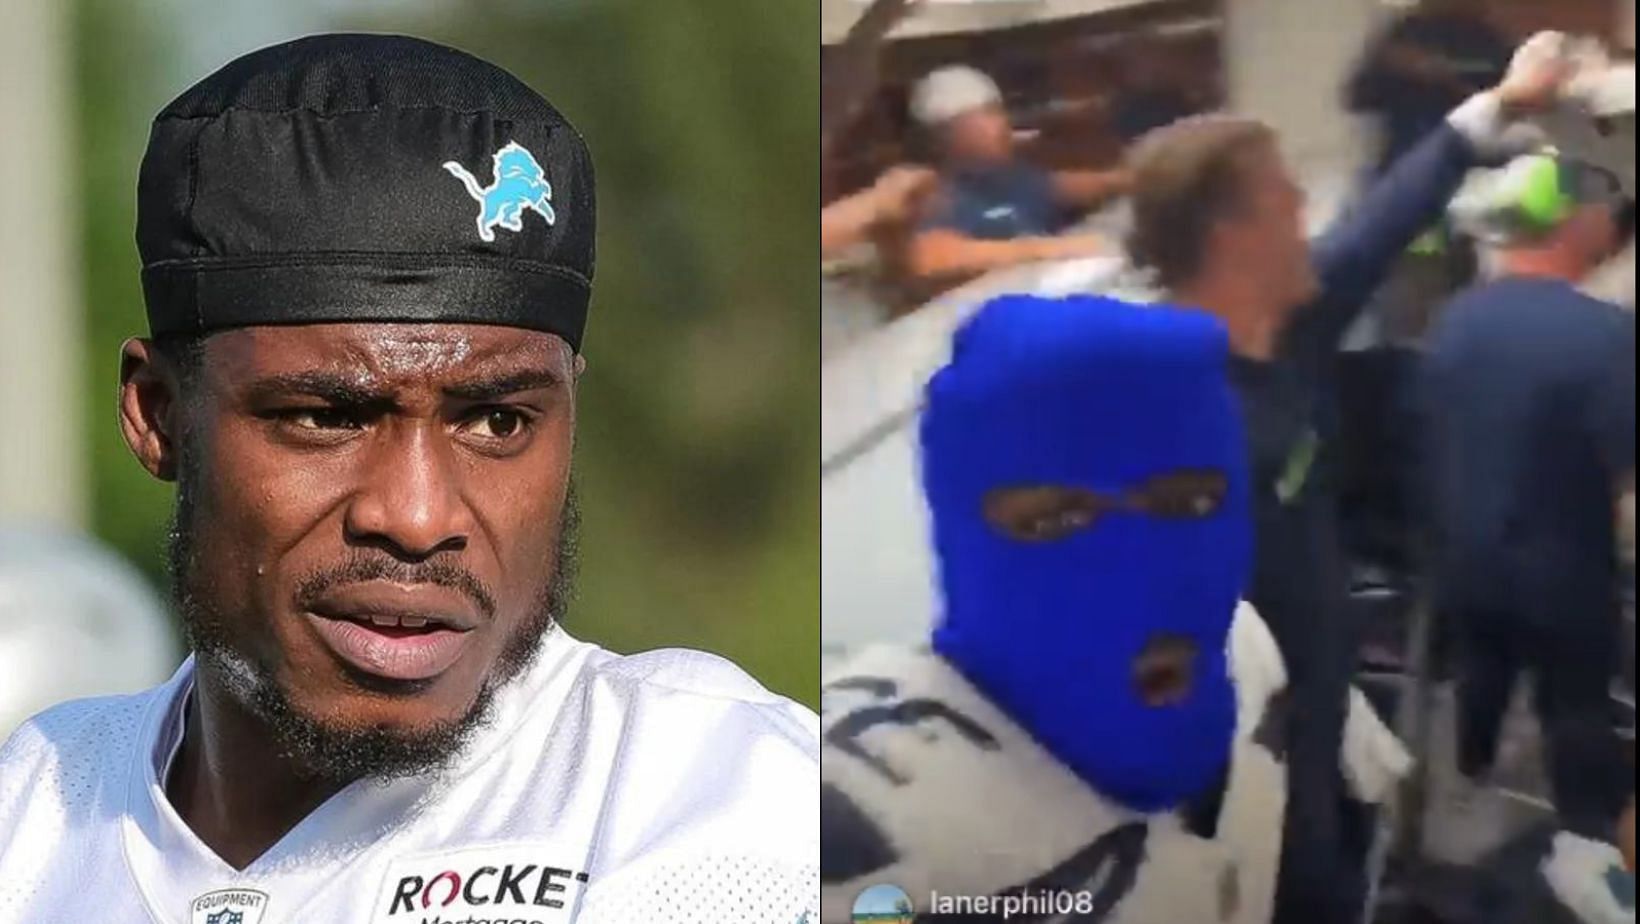 Seahawks mocked Detroit Lions players with the blue ski mask